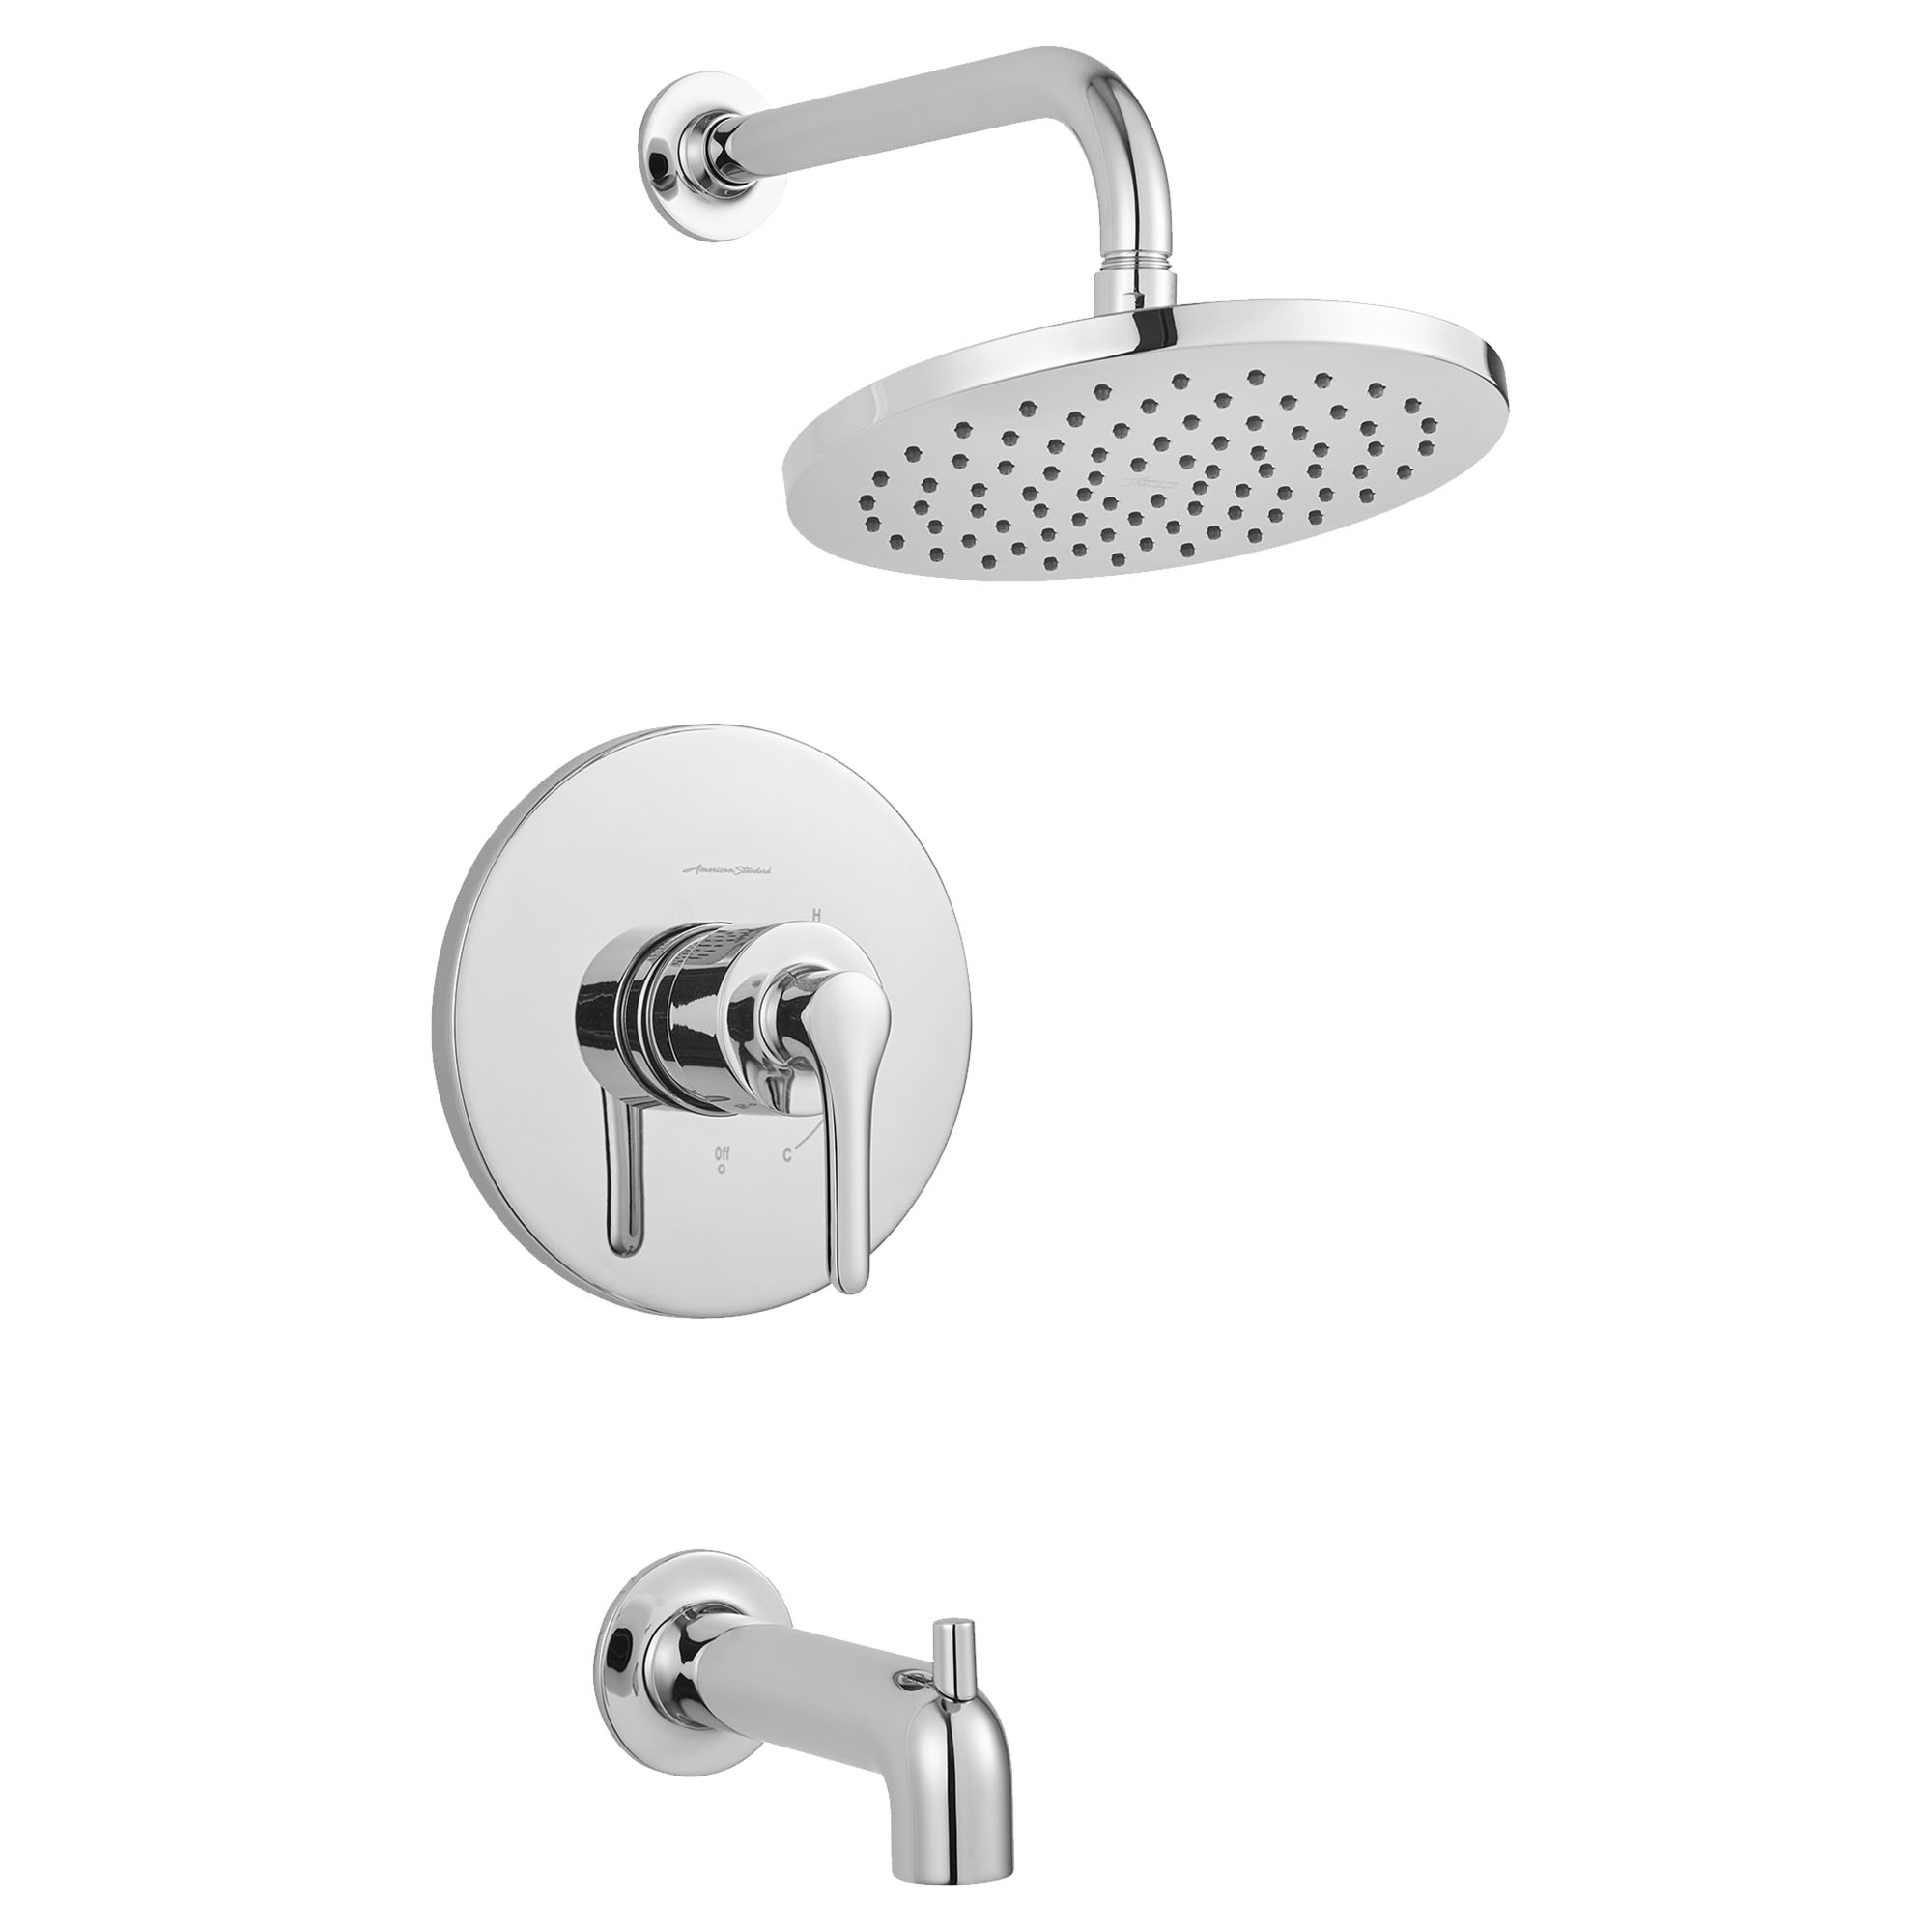 Studio™ S 1.8 gpm/6.8 L/min Tub and Shower Trim Kit With Rain Showerhead, Double Ceramic Pressure Balance Cartridge With Lever Handle